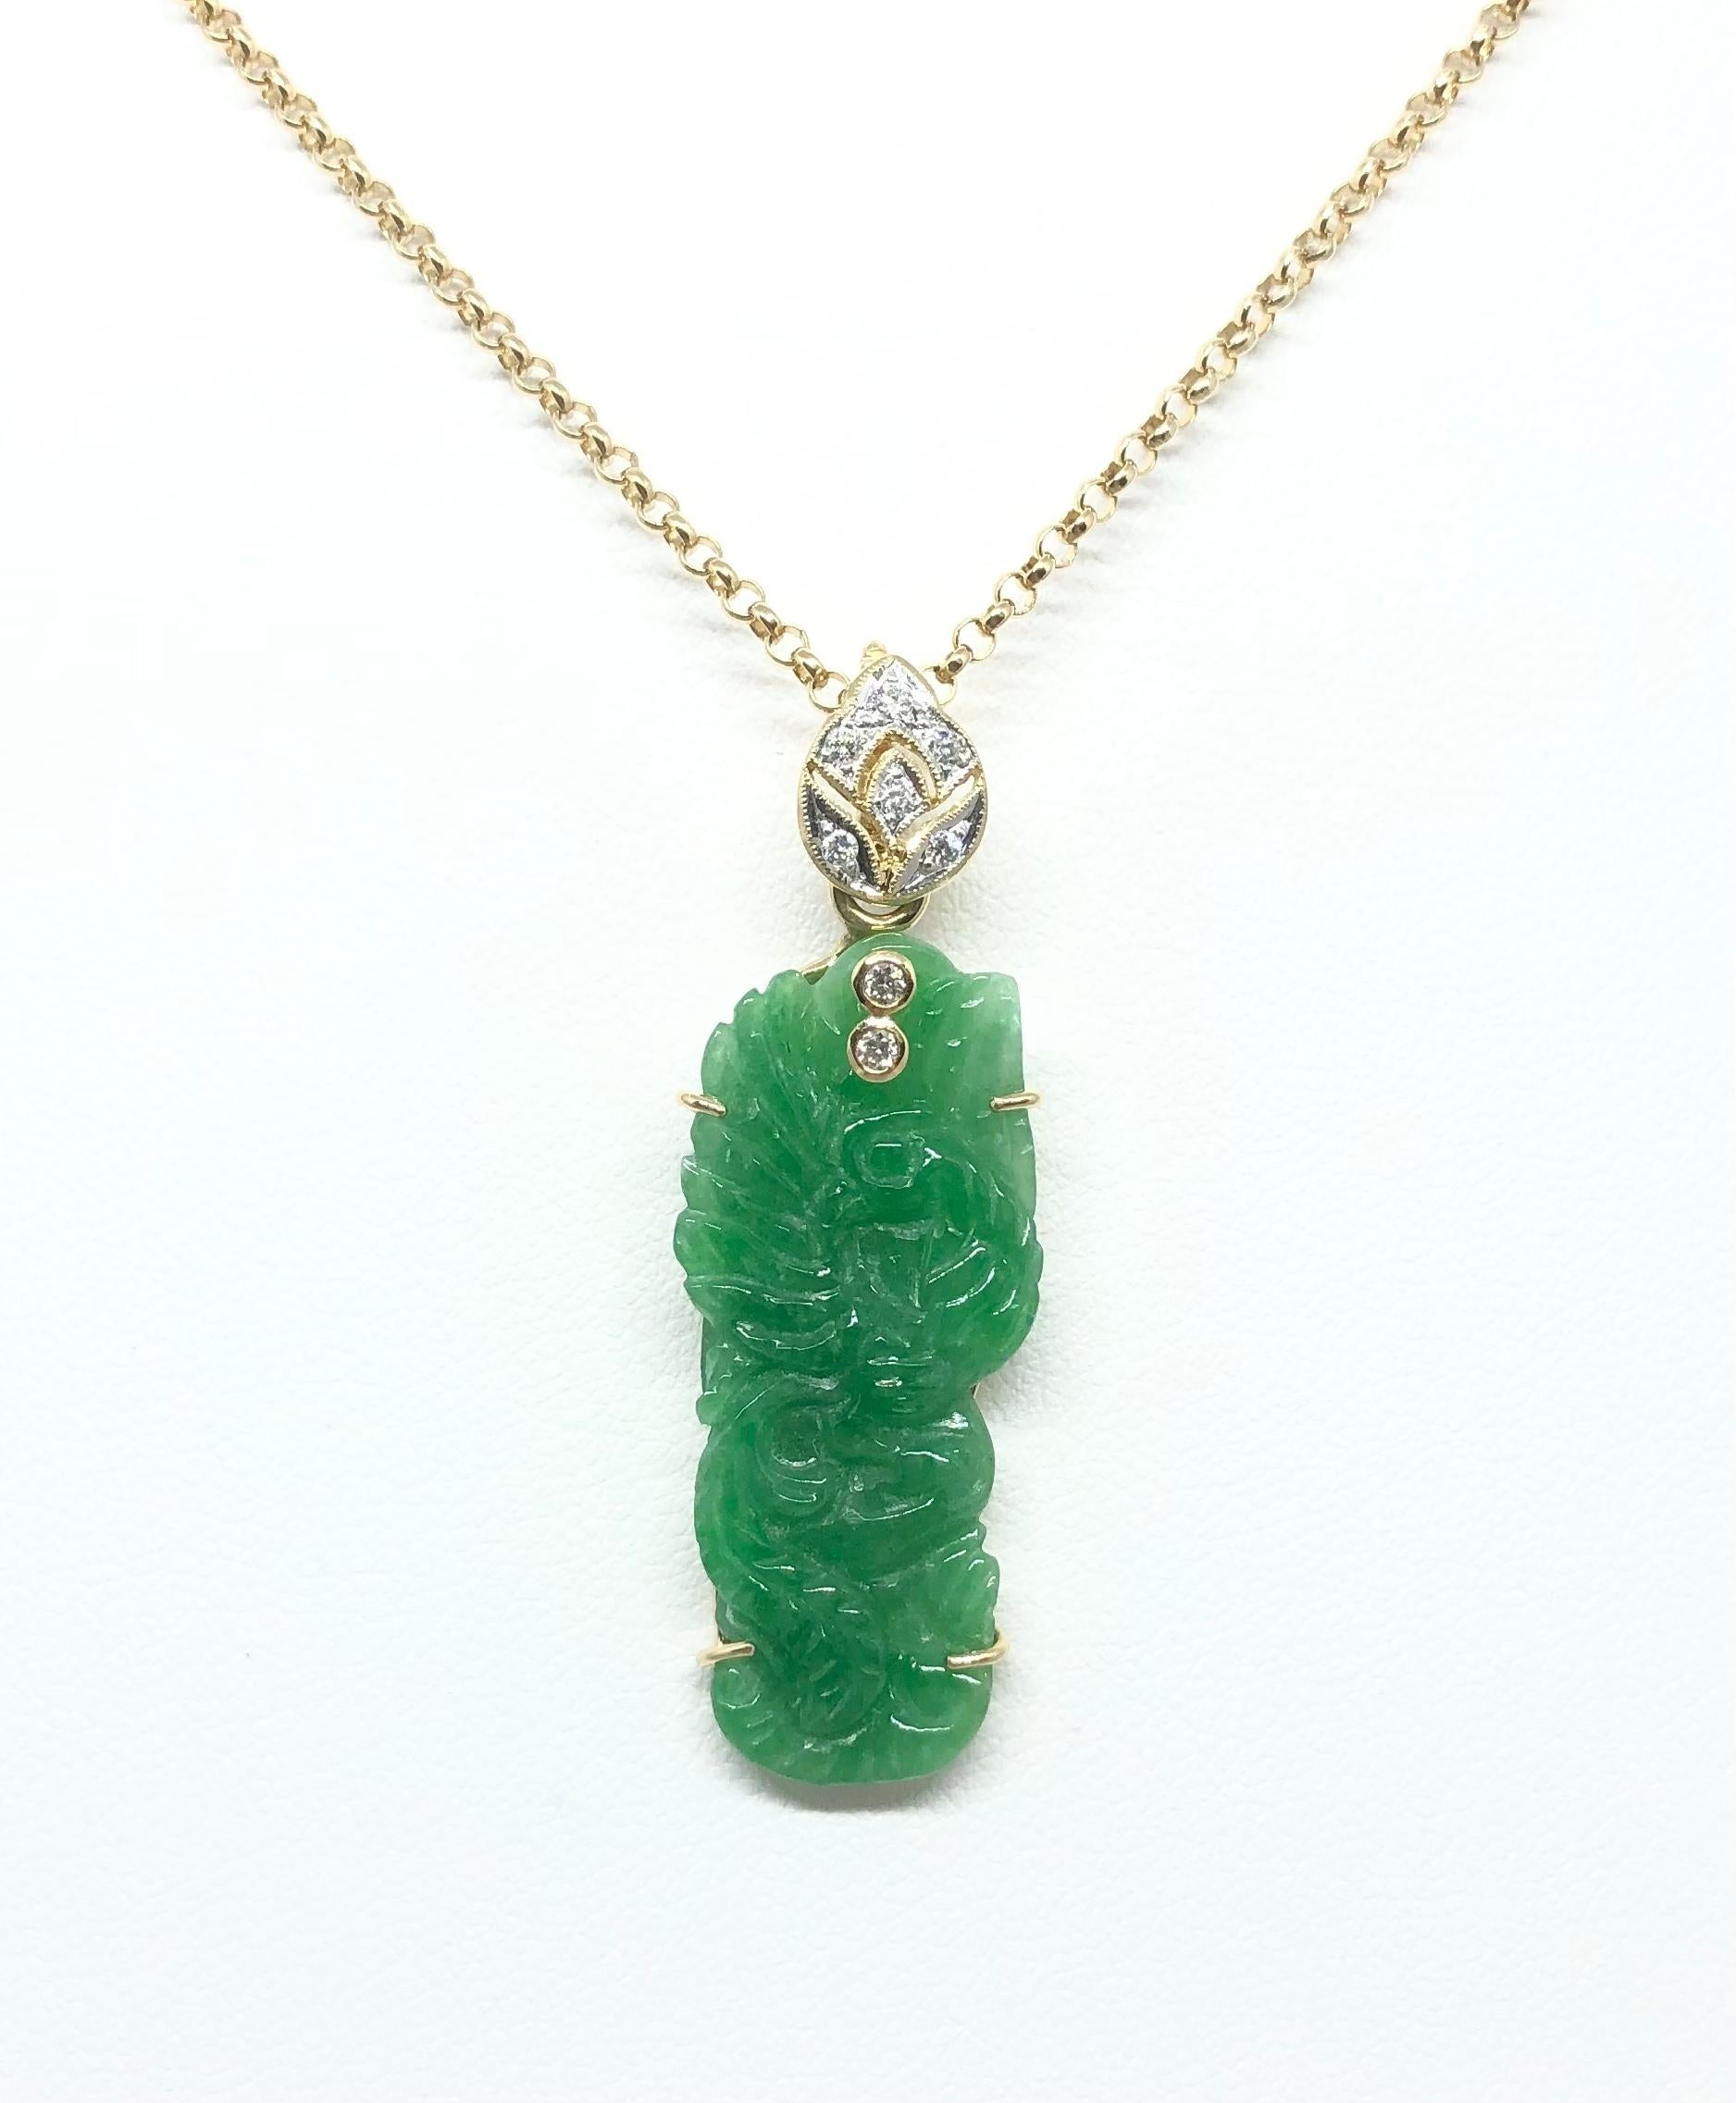 Jade with Diamond 0.08 carat Pendant set in 18 Karat Gold Settings
(chain not included)

Width: 1.4 cm 
Length: 4.2 cm
Total Weight: 4.29  grams

